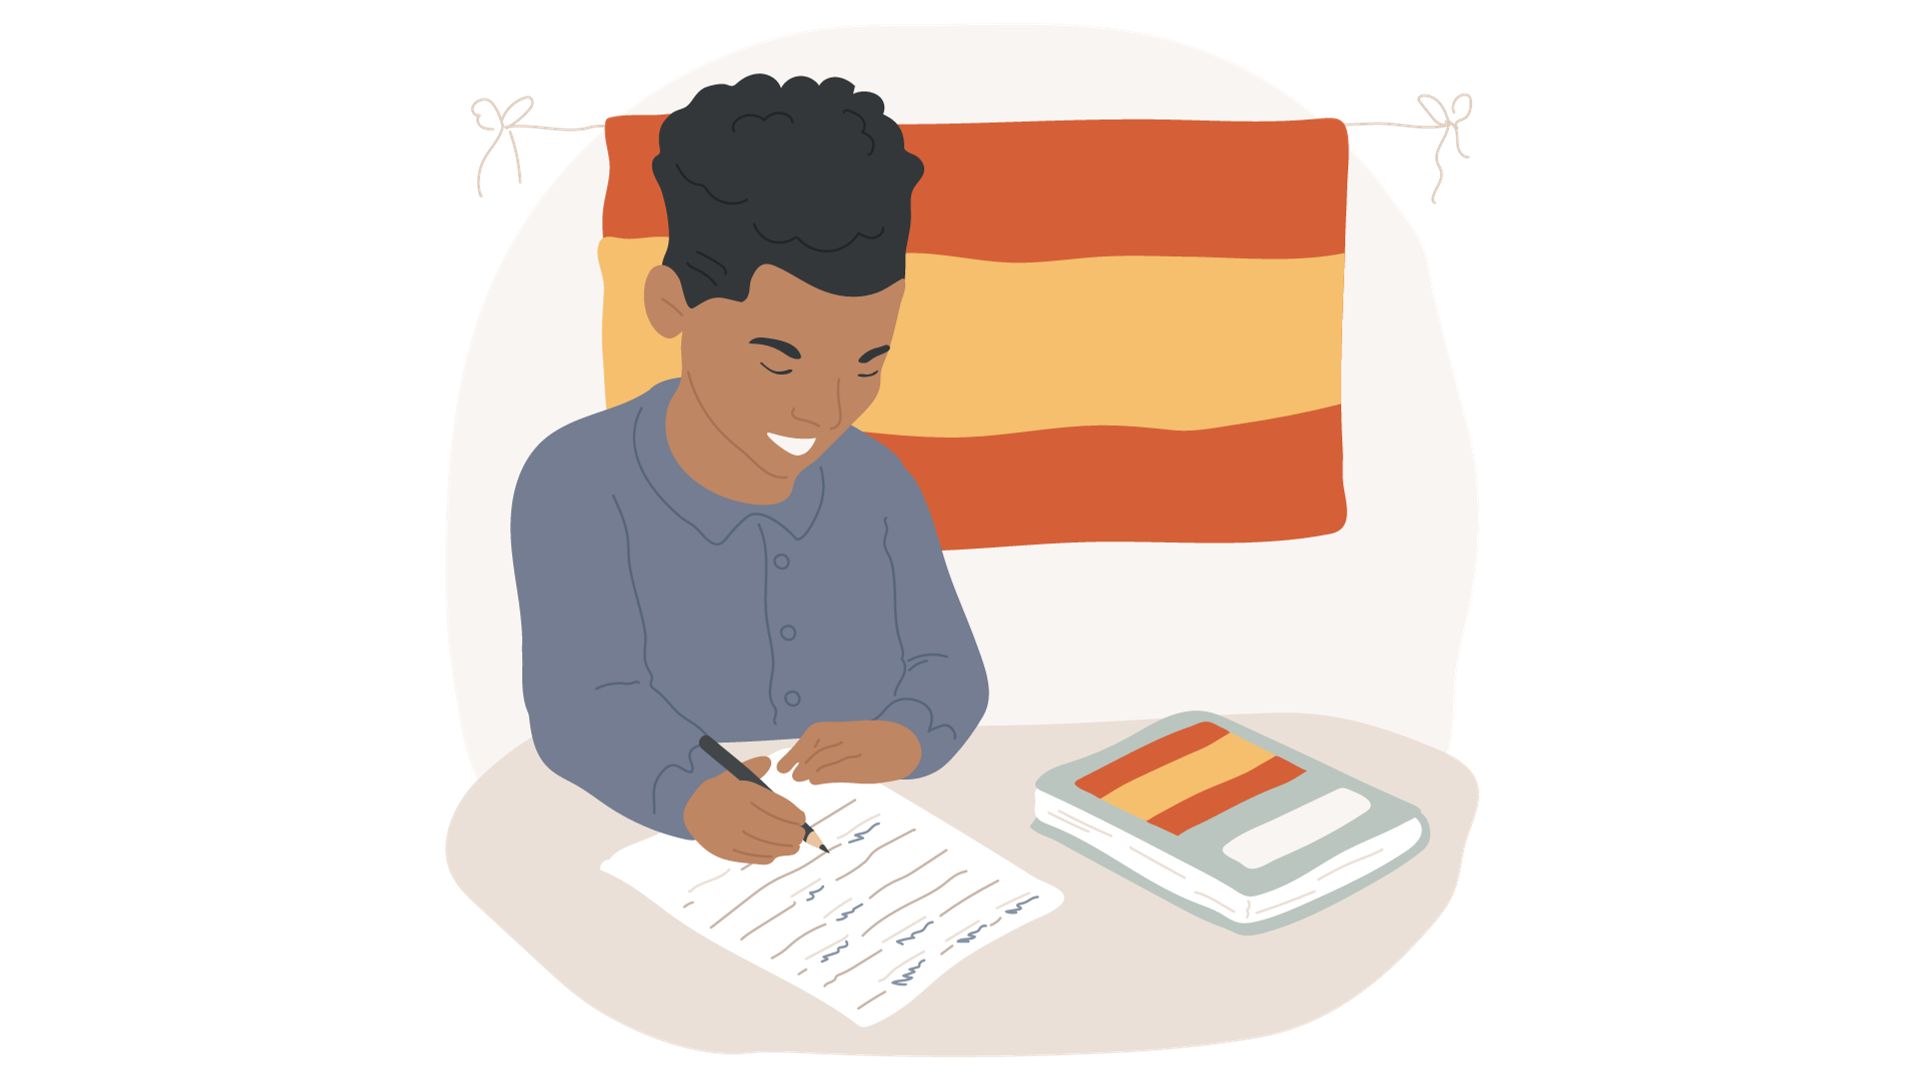 An illustration of a Spanish student taking a test.